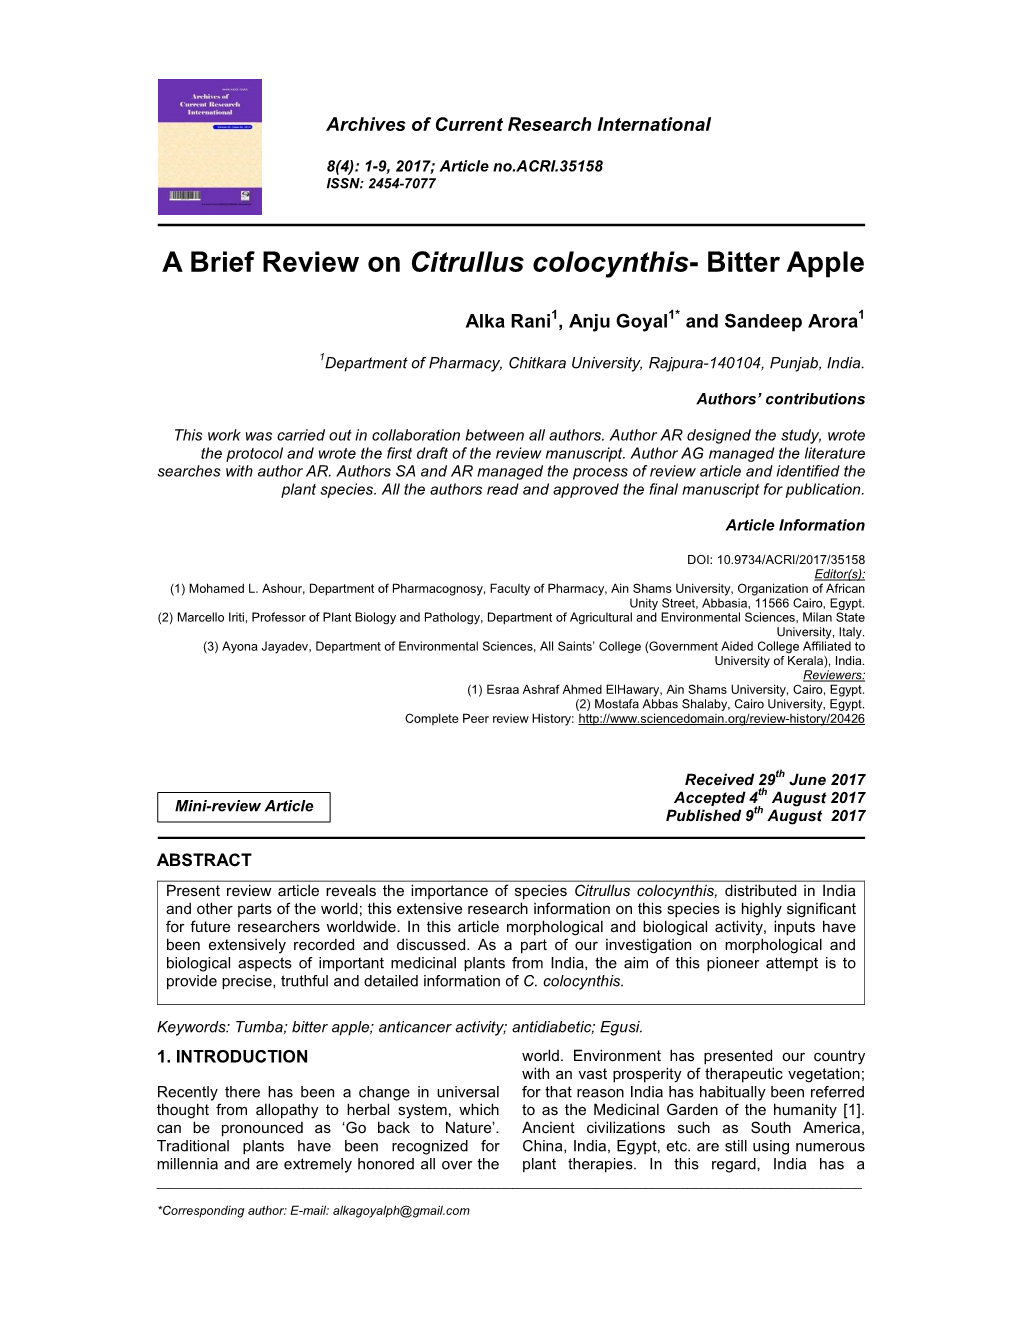 A Brief Review on Citrullus Colocynthis- Bitter Apple